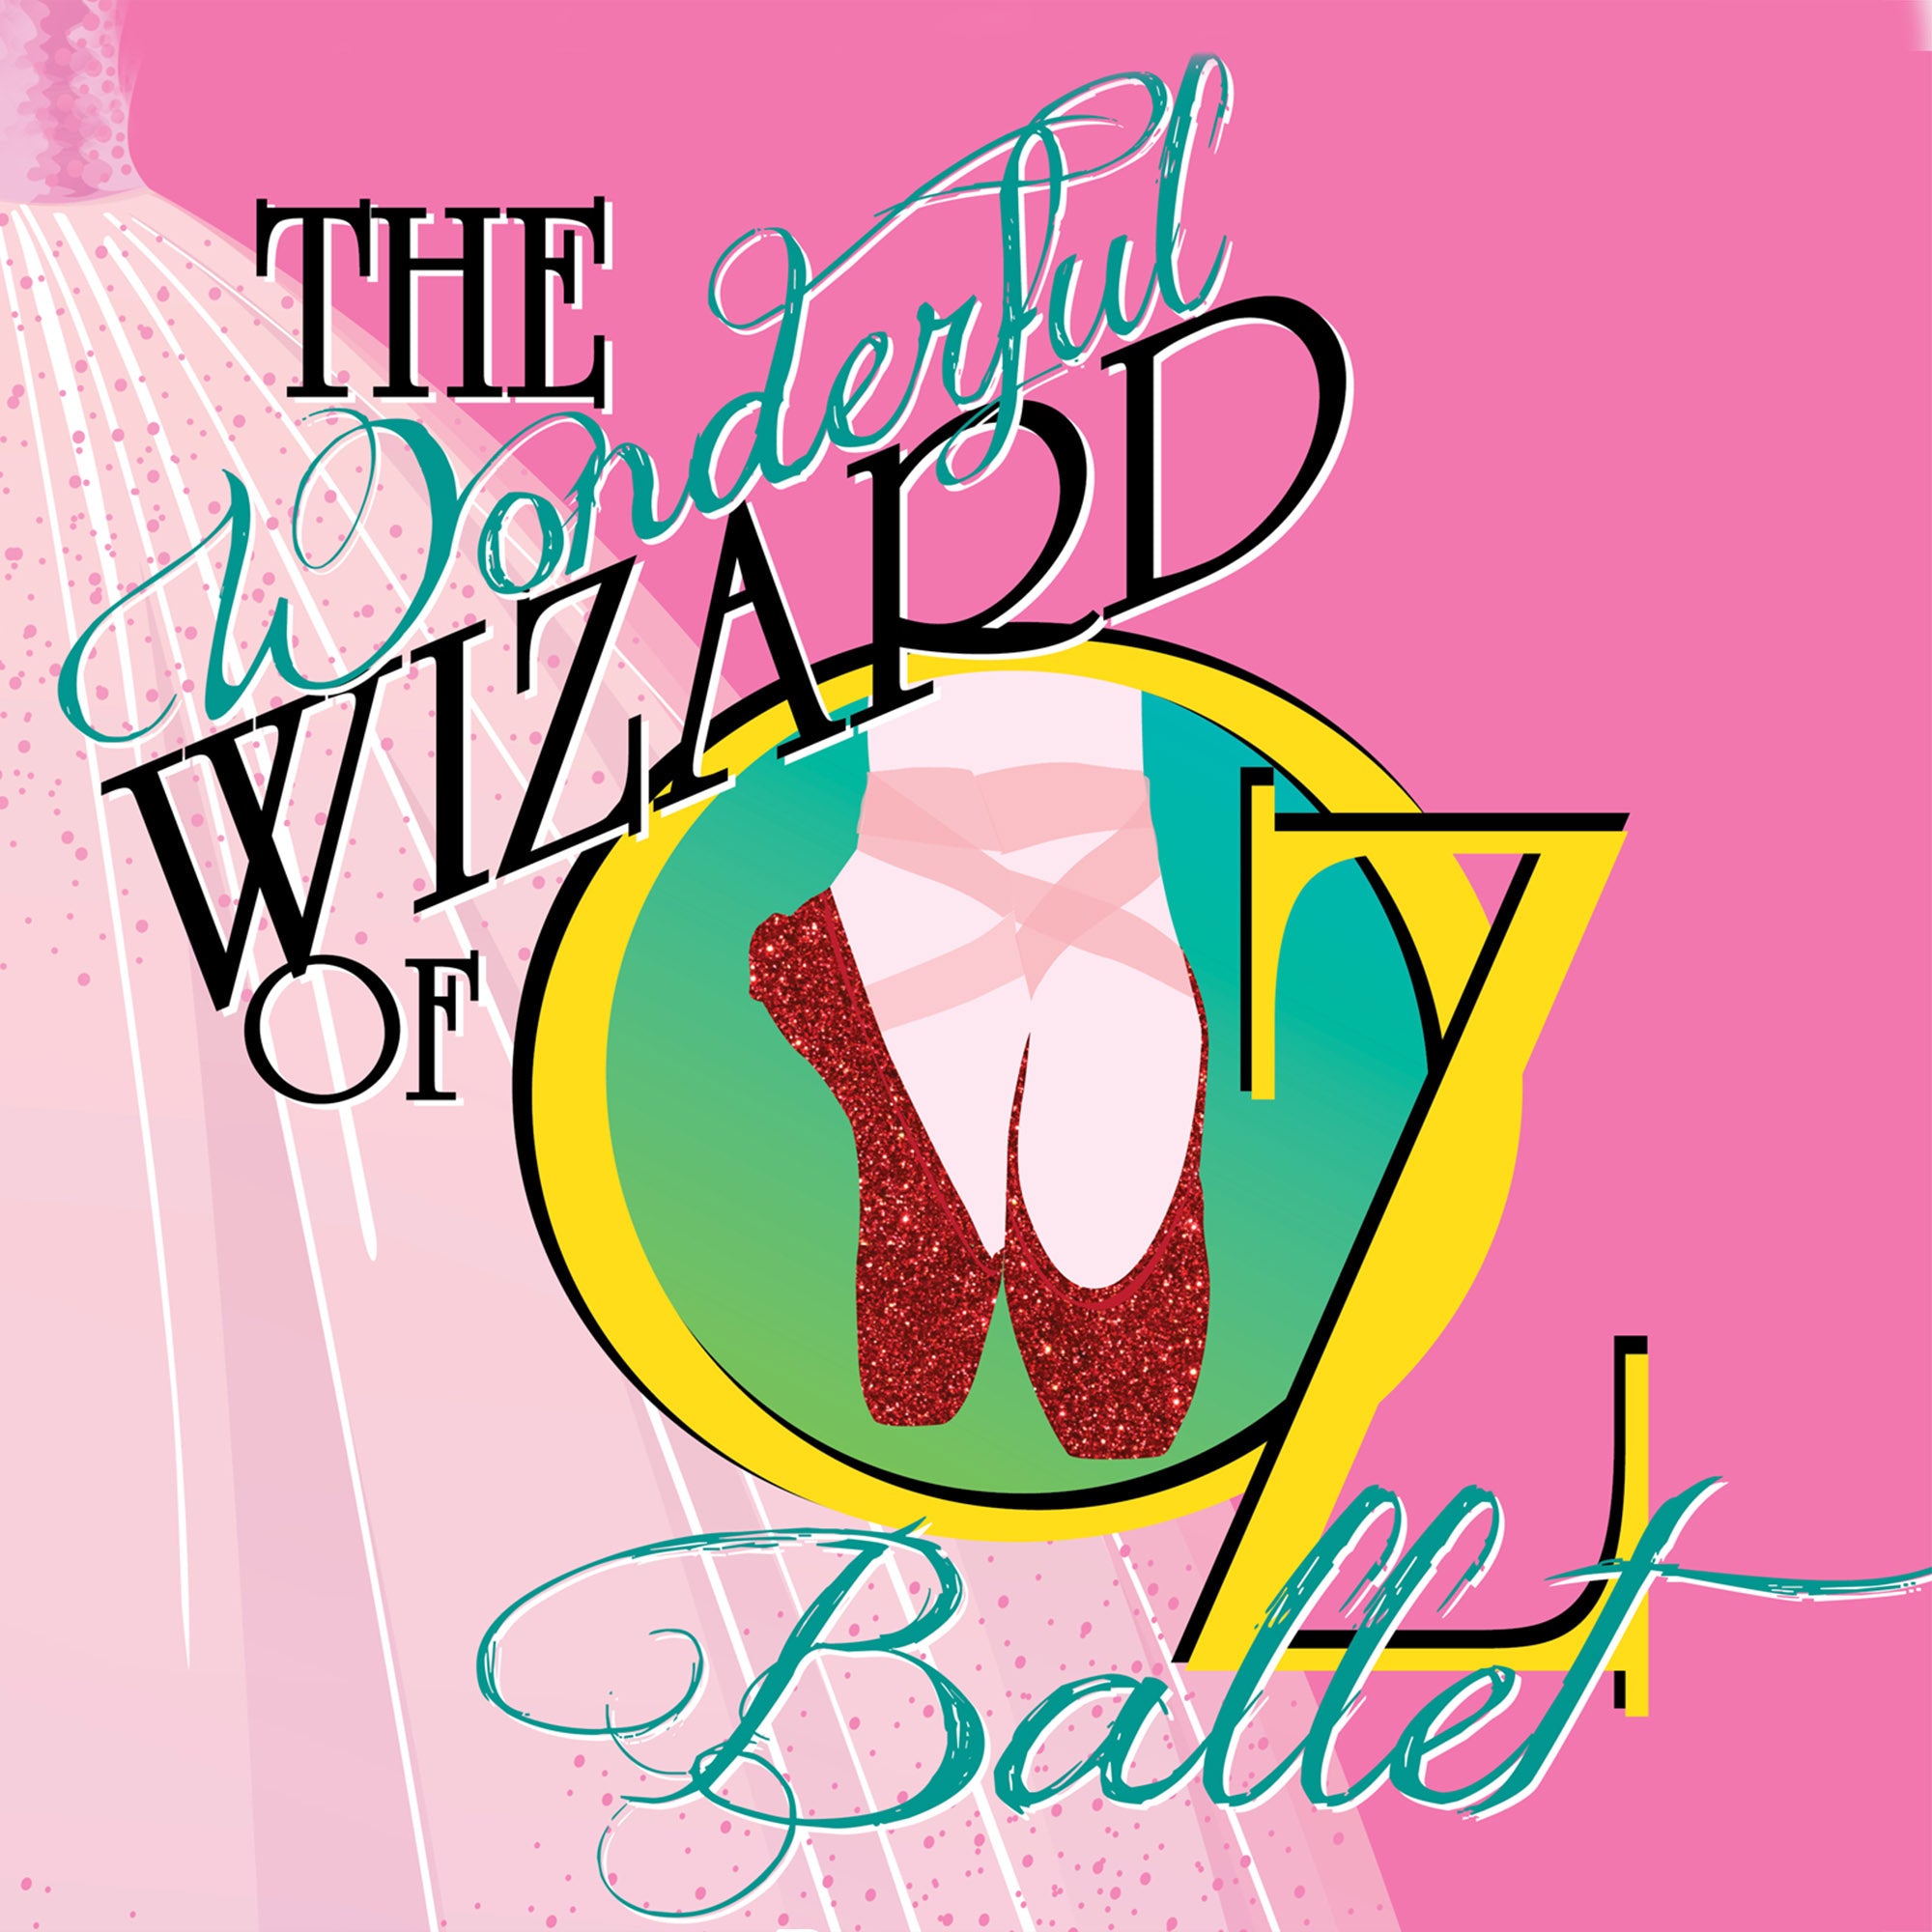 Kristina Pulcini Ballet Academy presents "The Wizard of Oz" - 2016 -  6:30 pm Performance - Active Image Media